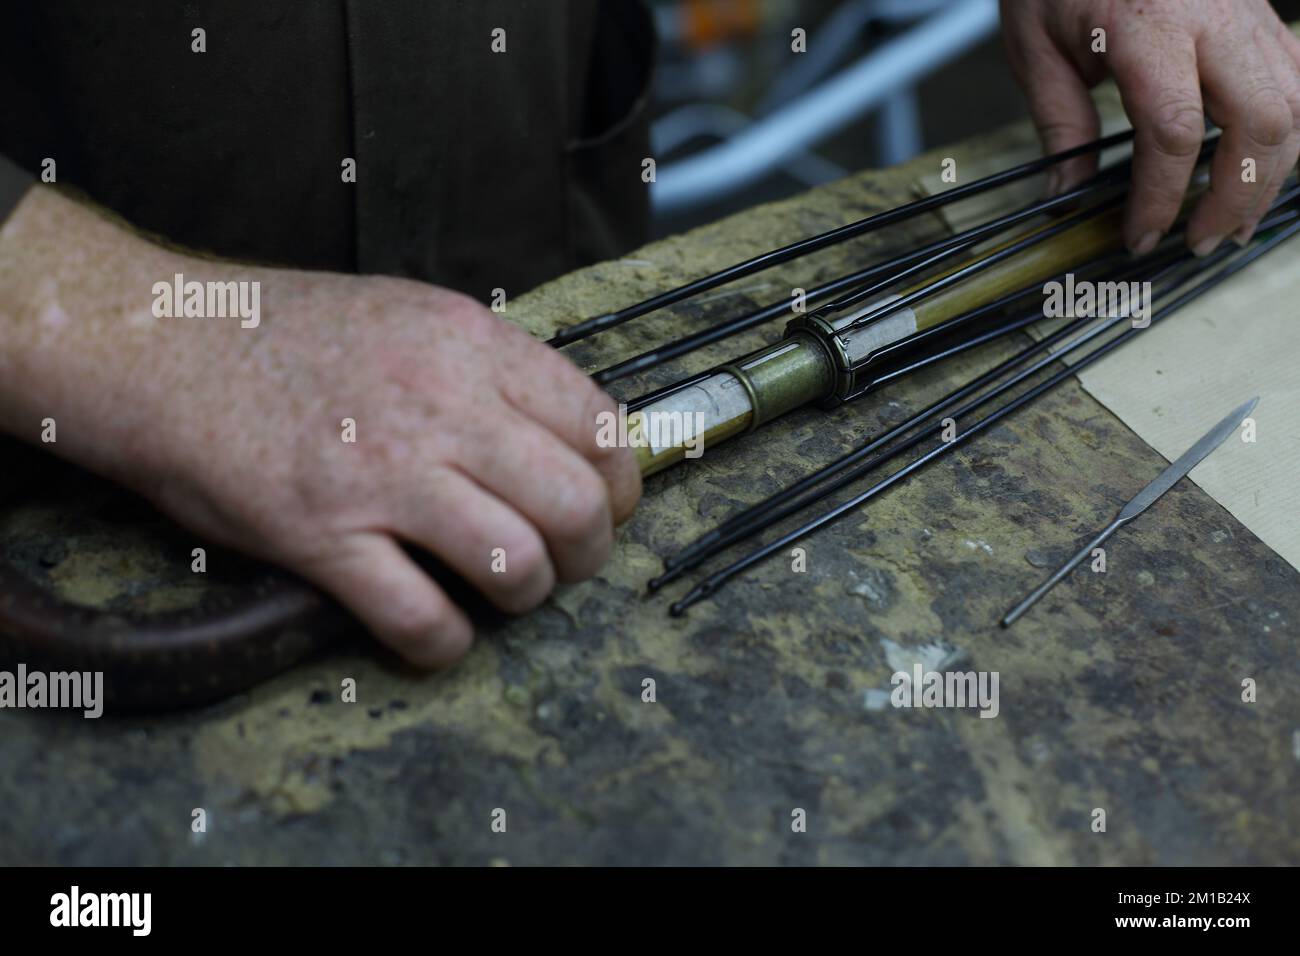 James Smith & Sons making traditional umbrella in their basement workshop ,in London ,England Stock Photo